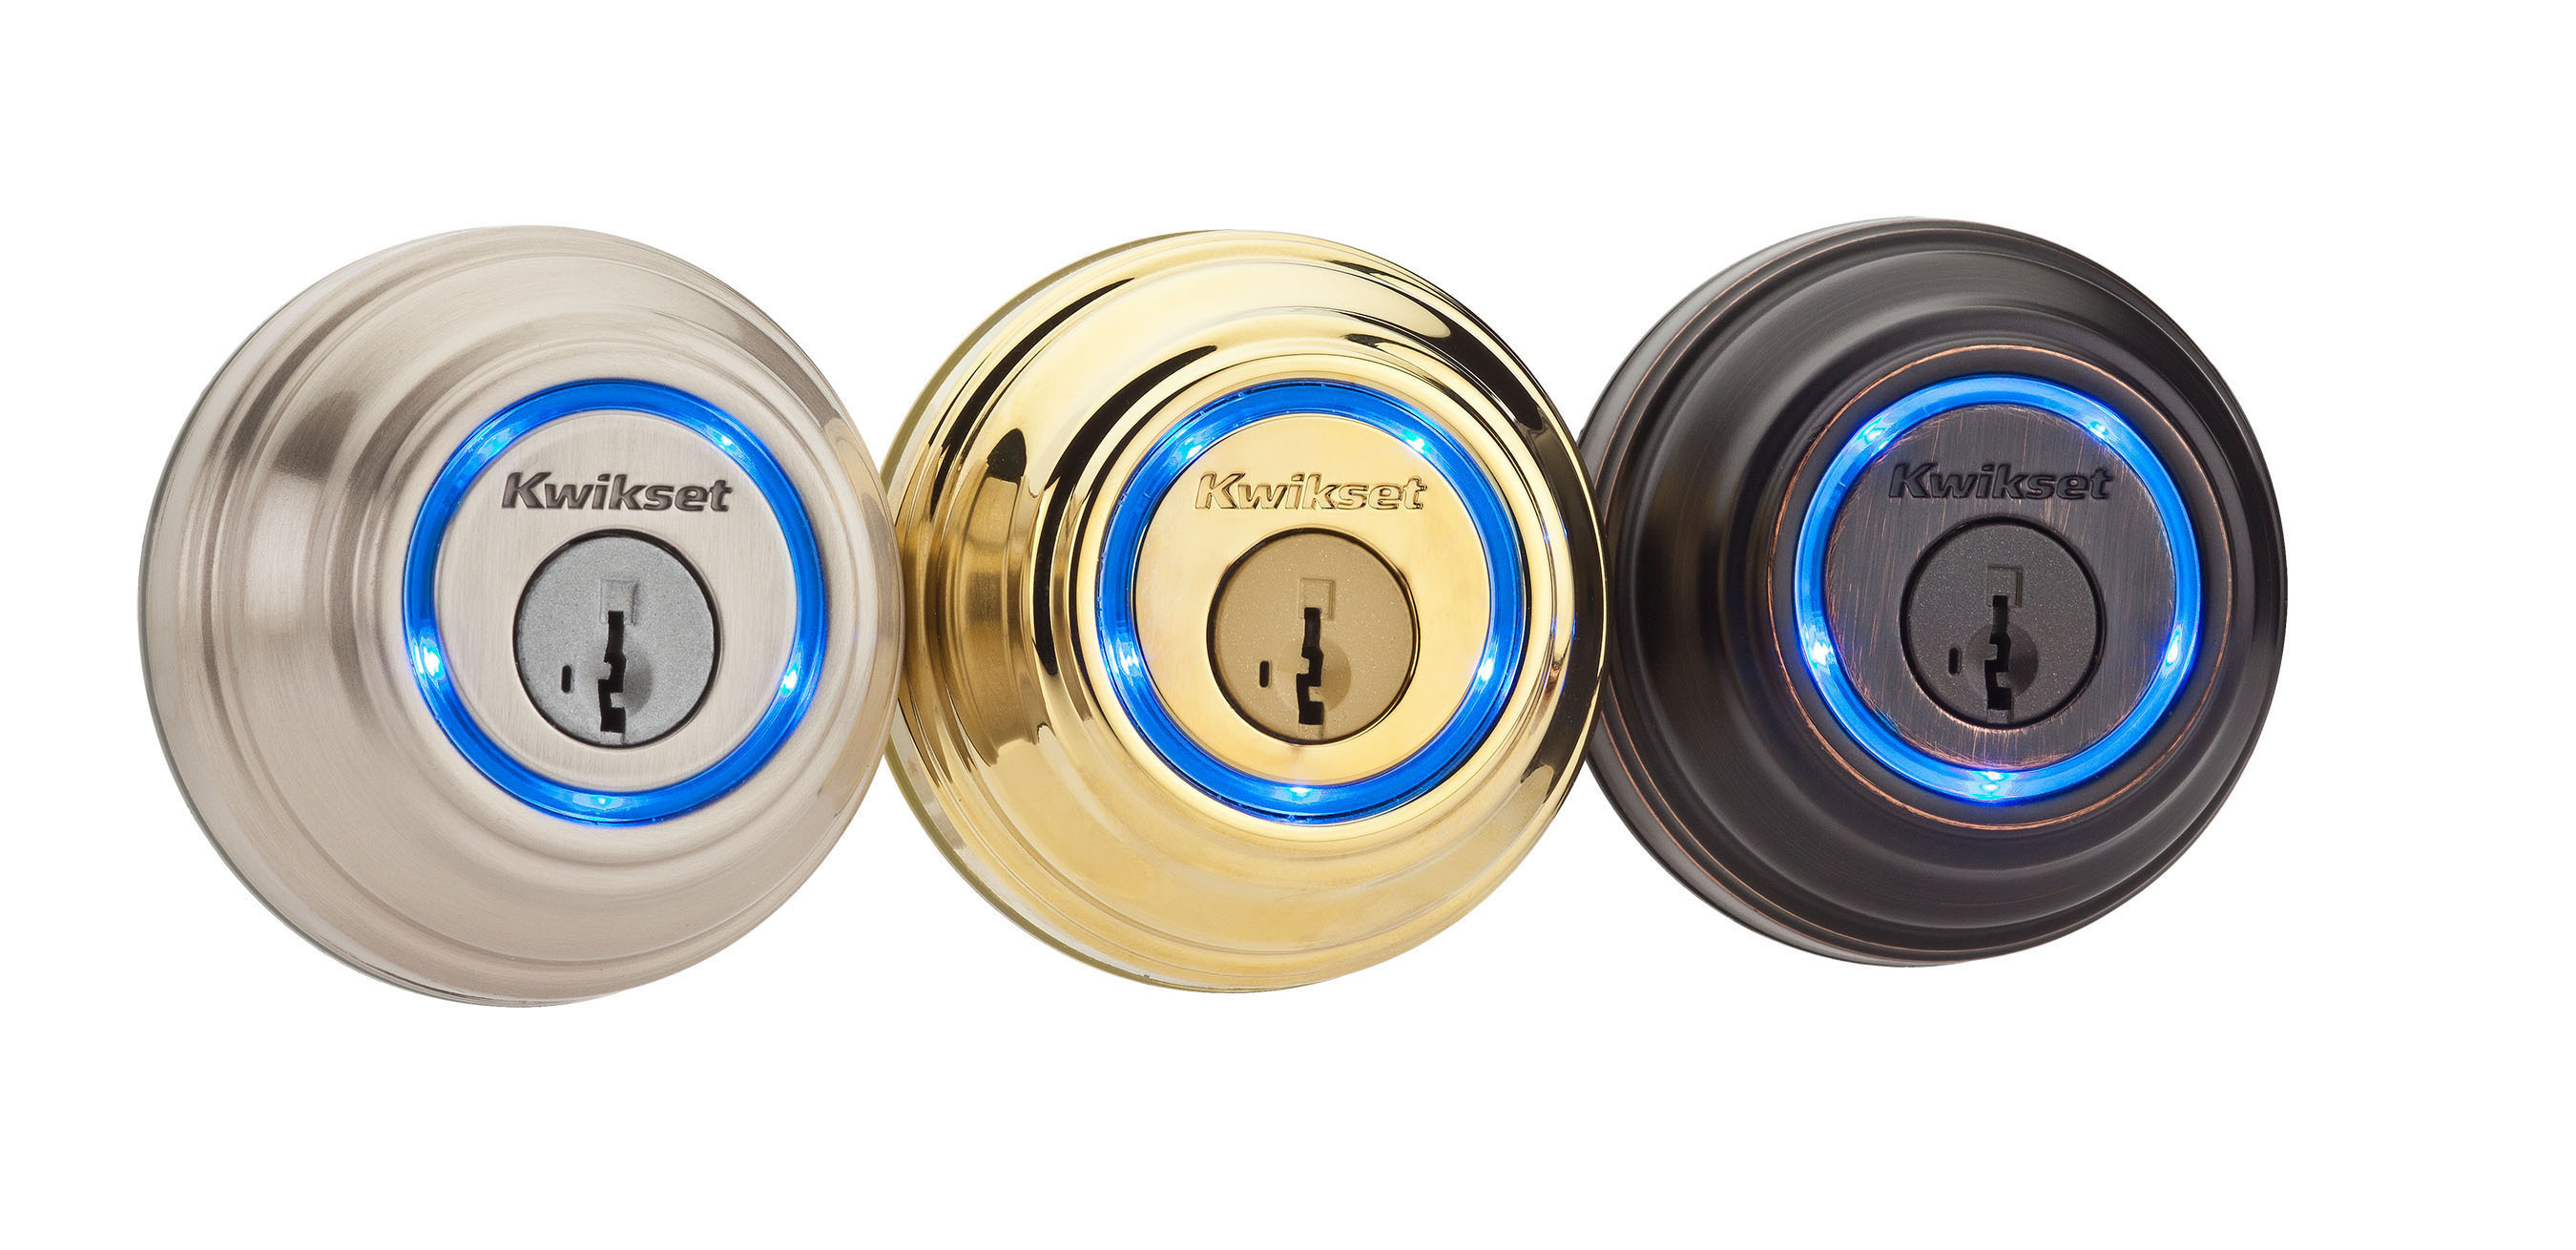 Kwikset's highly anticipated Bluetooth(R)-enabled Kevo deadbolt is now available to order and begins shipping today to homes across America. (PRNewsFoto/Kwikset) (PRNewsFoto/KWIKSET)